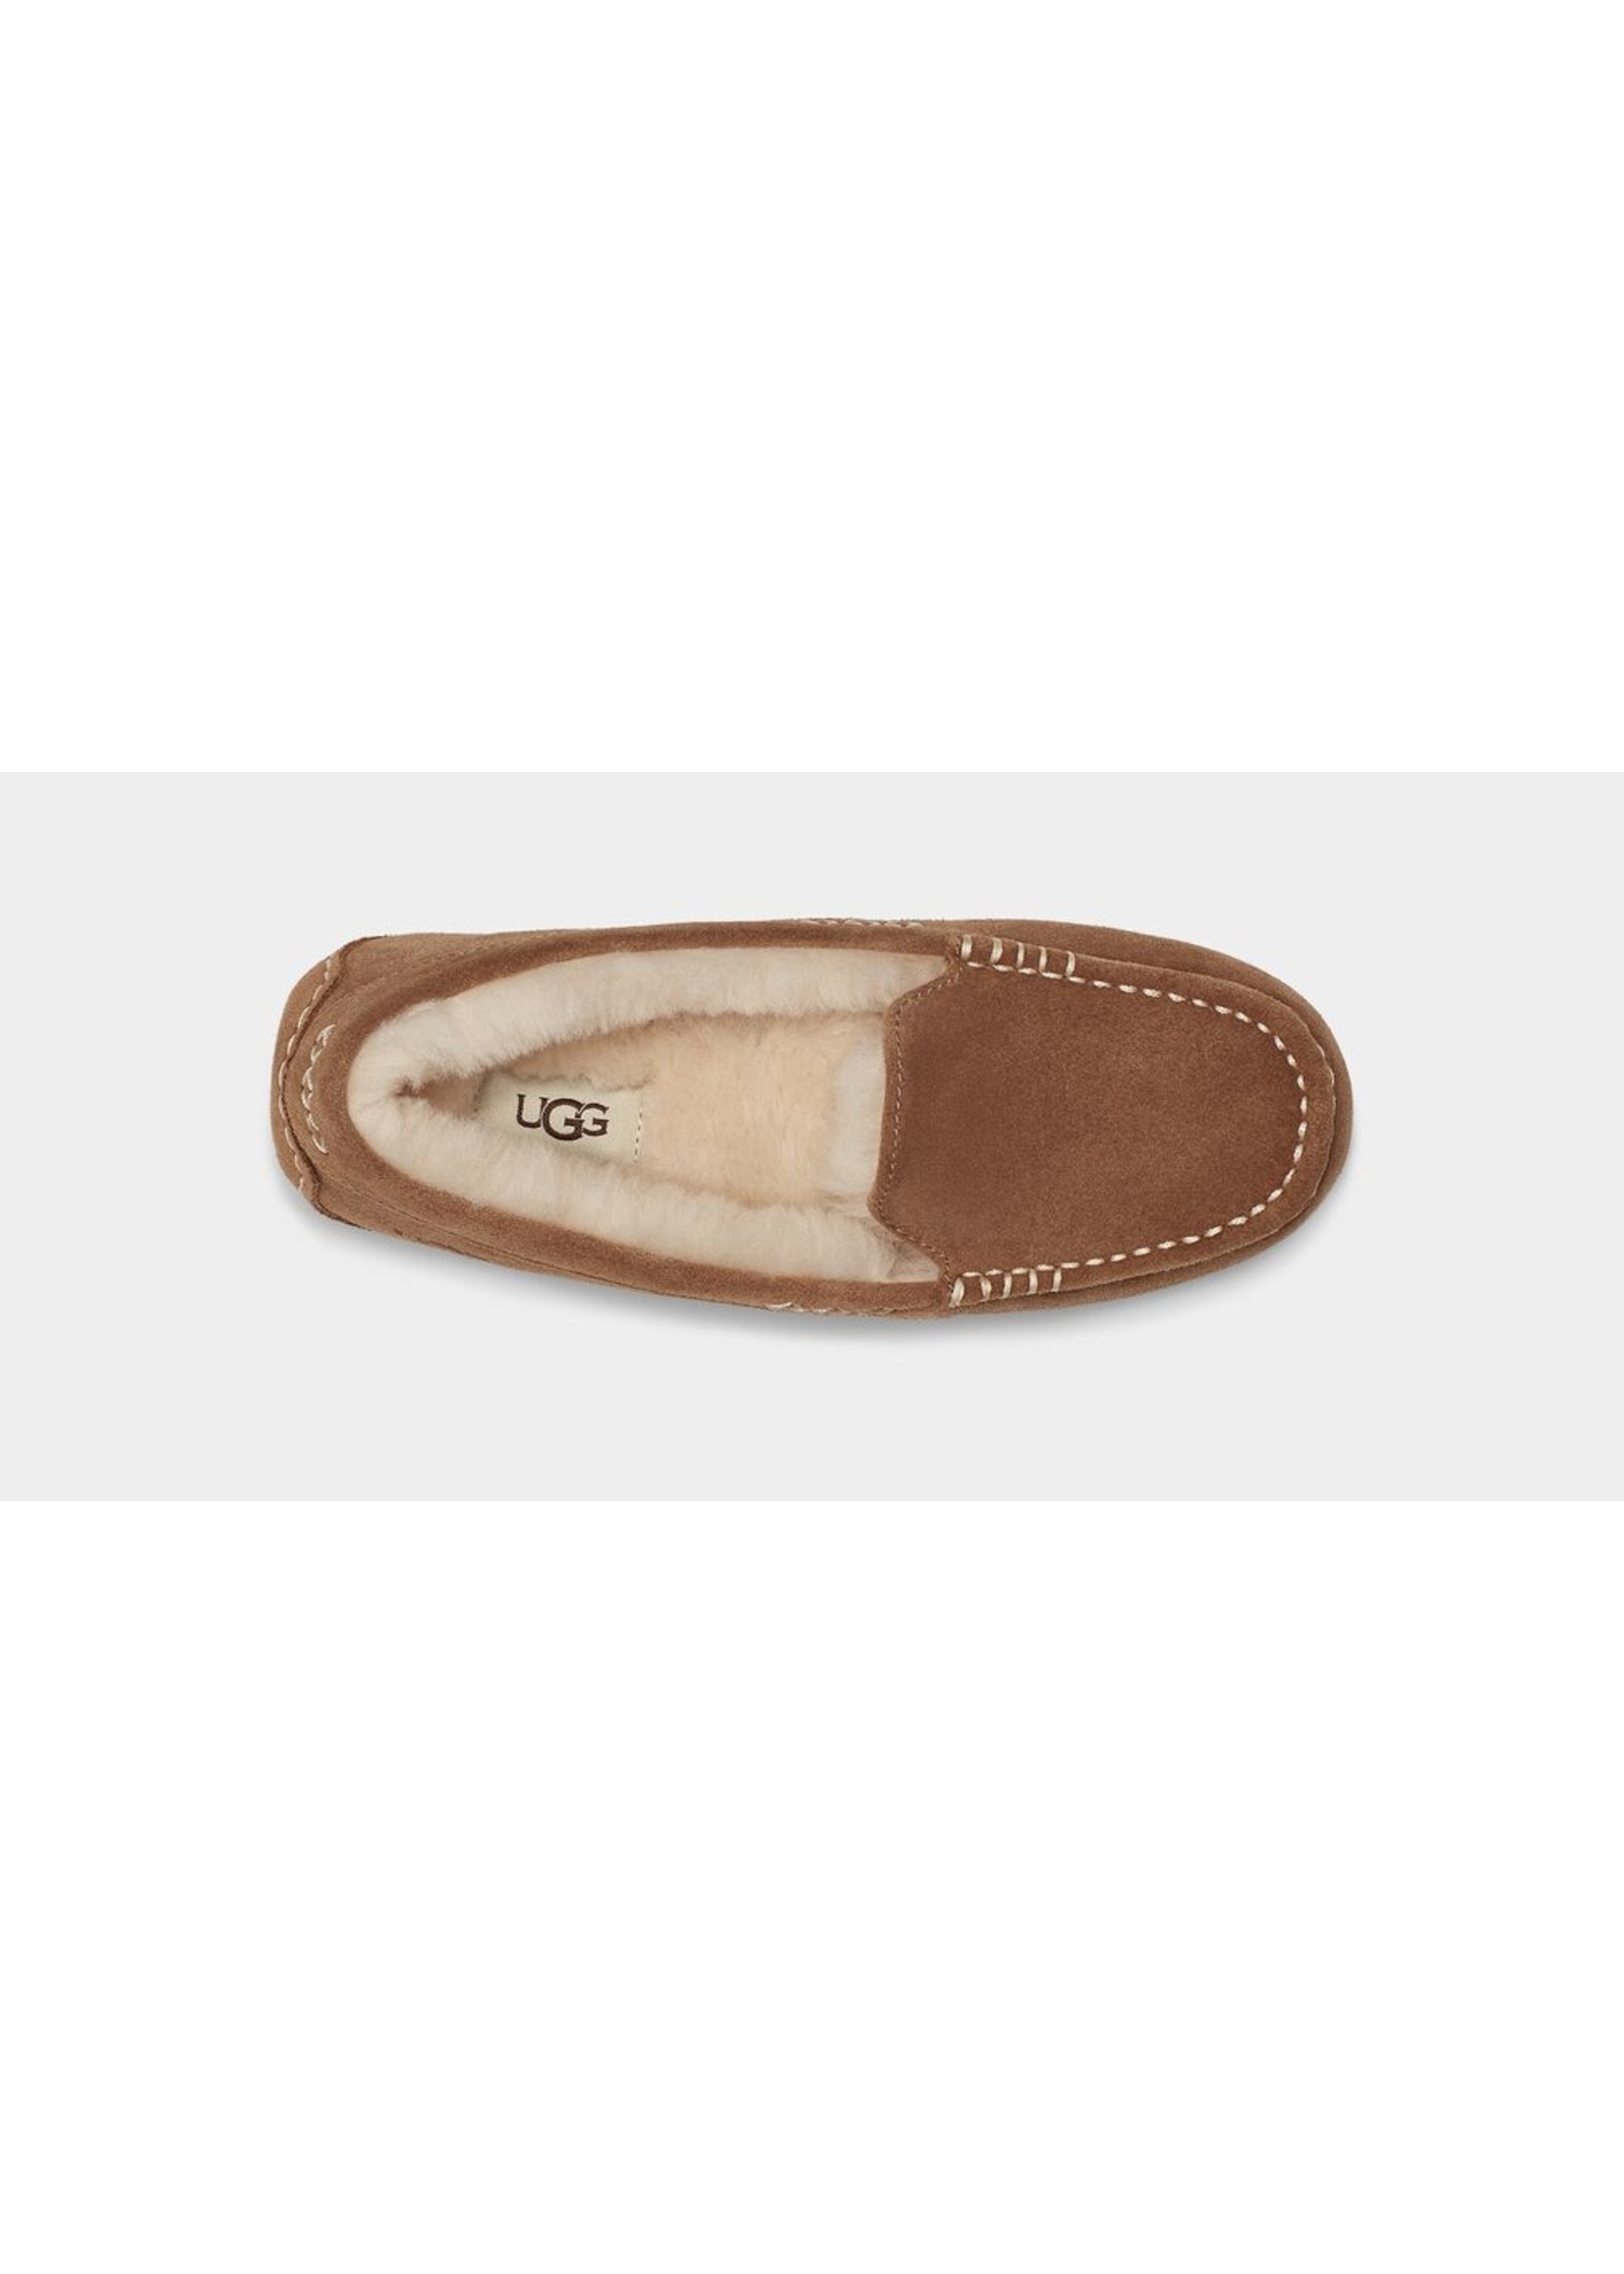 UGG Women's Suede ANSLEY Moccasin